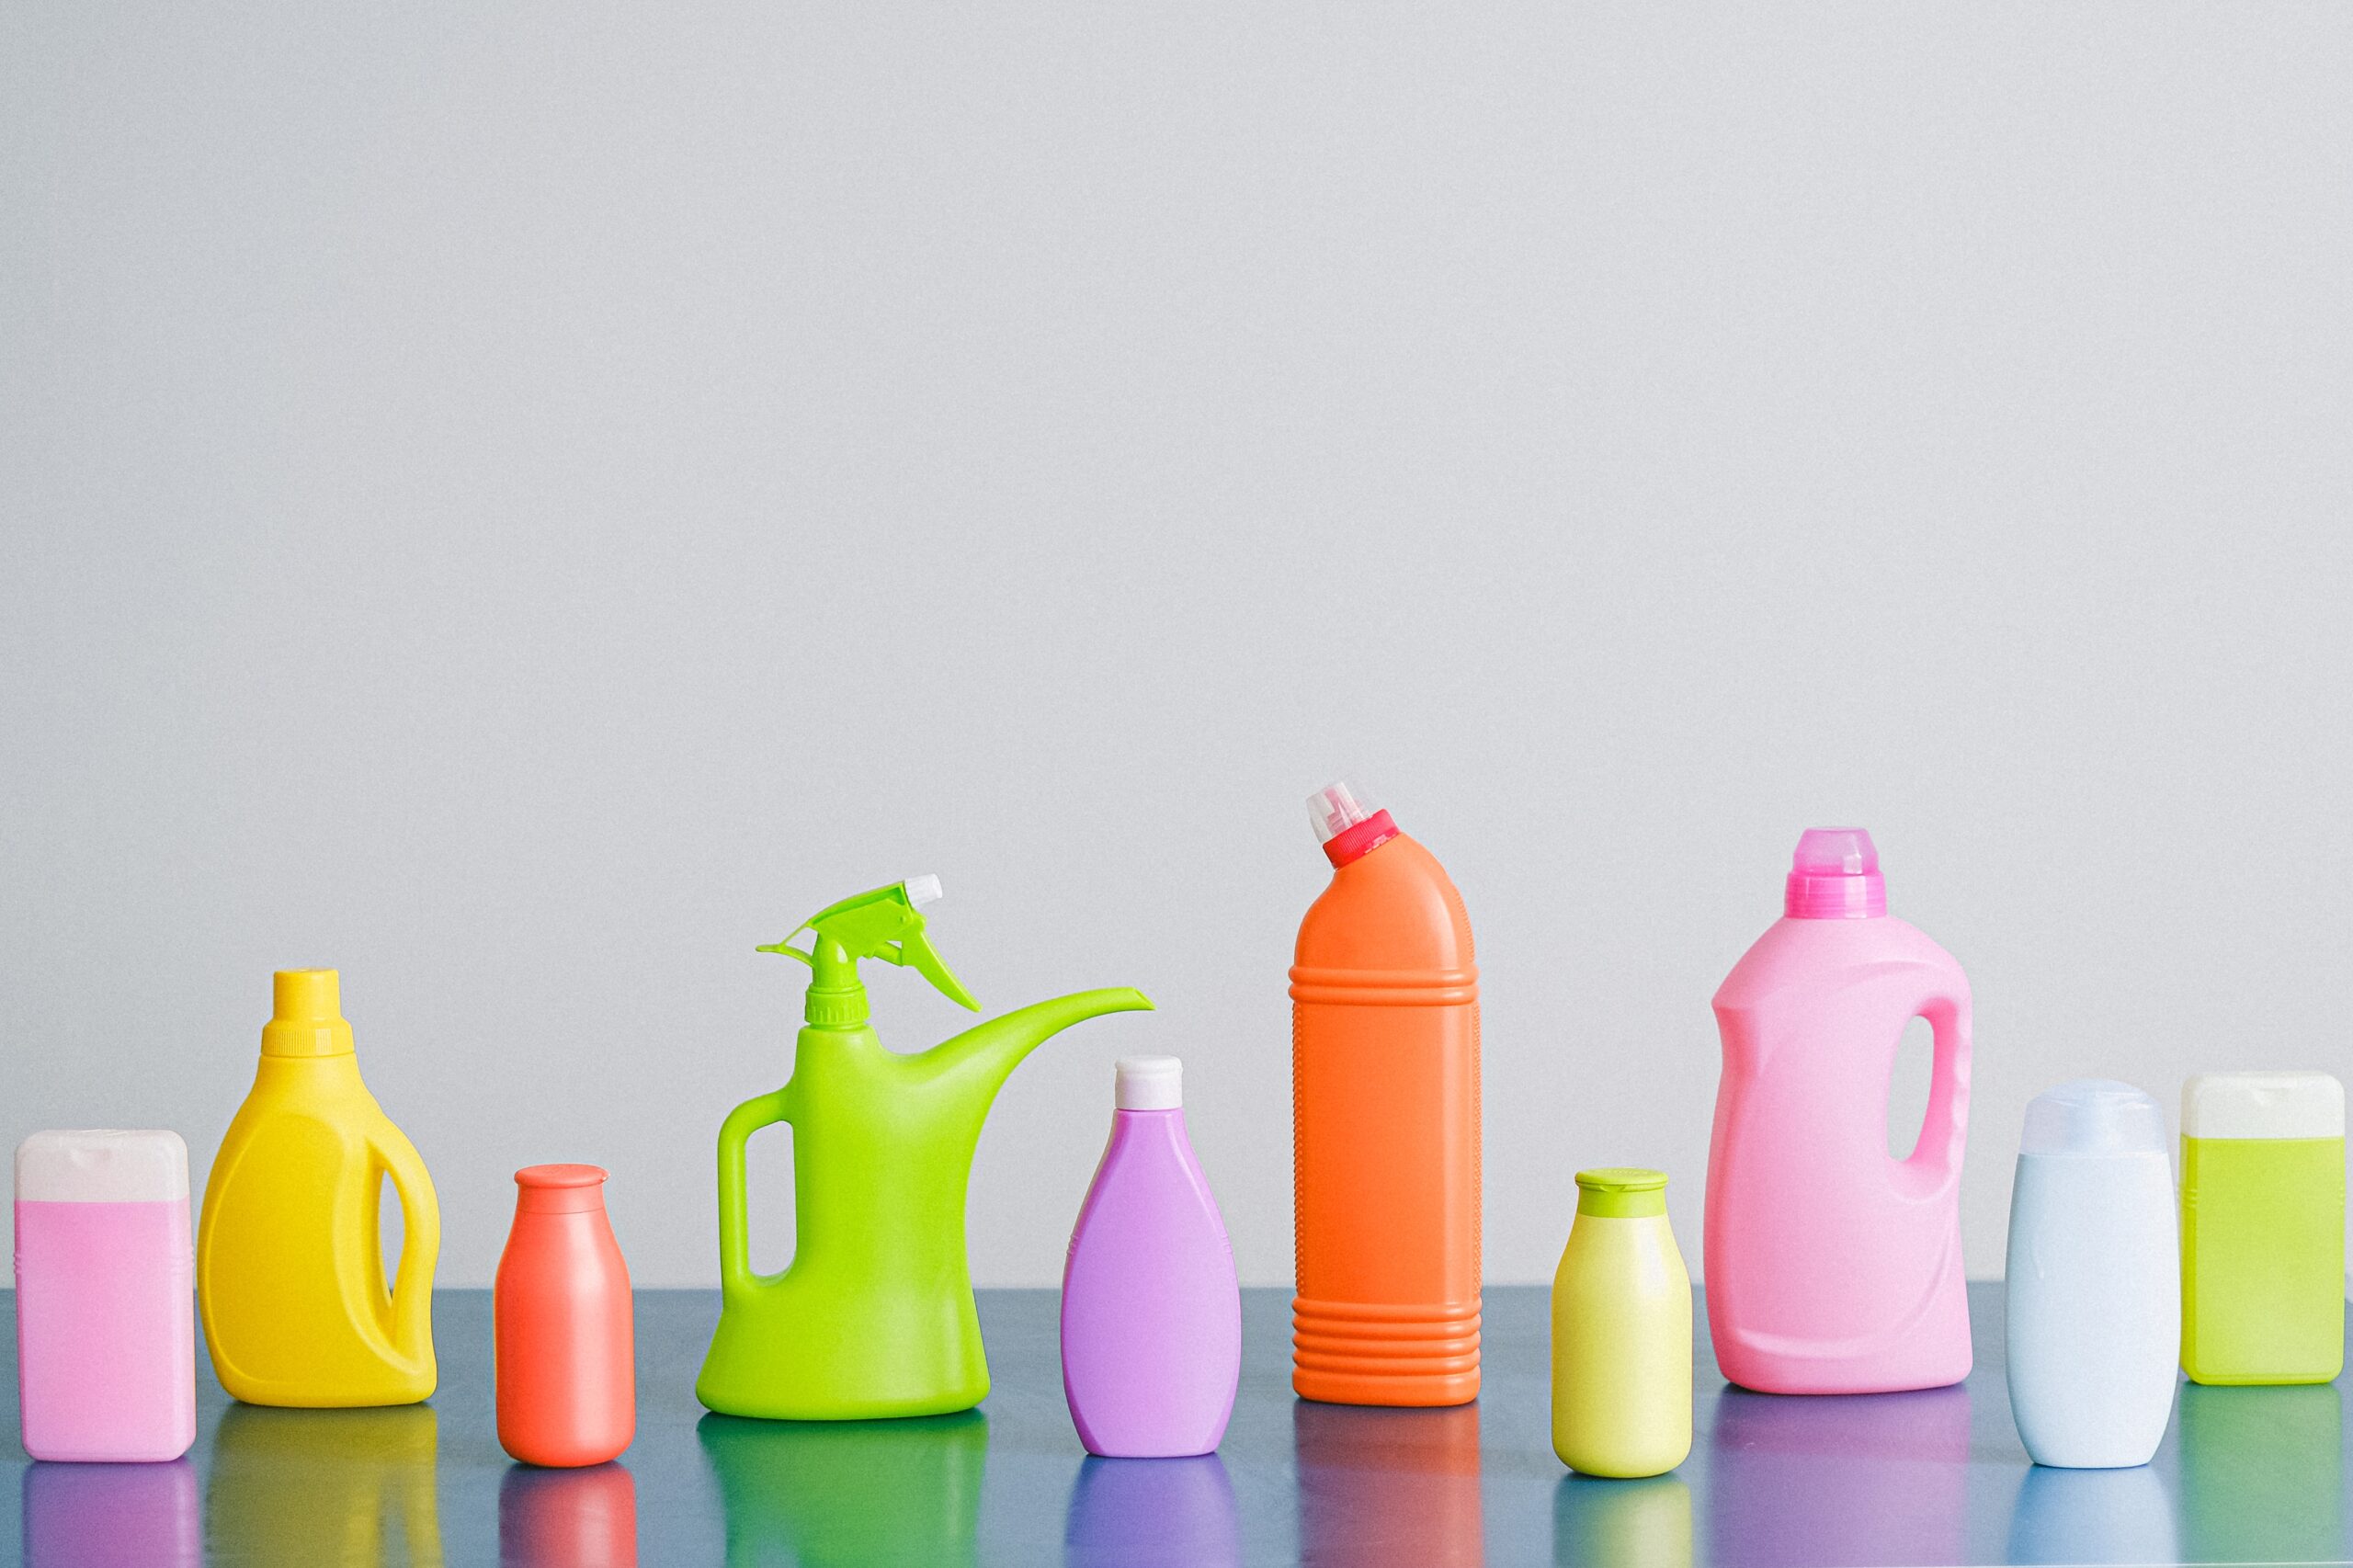 An assortment of unlabeled cleaning products in varying shapes, sizes, and colors